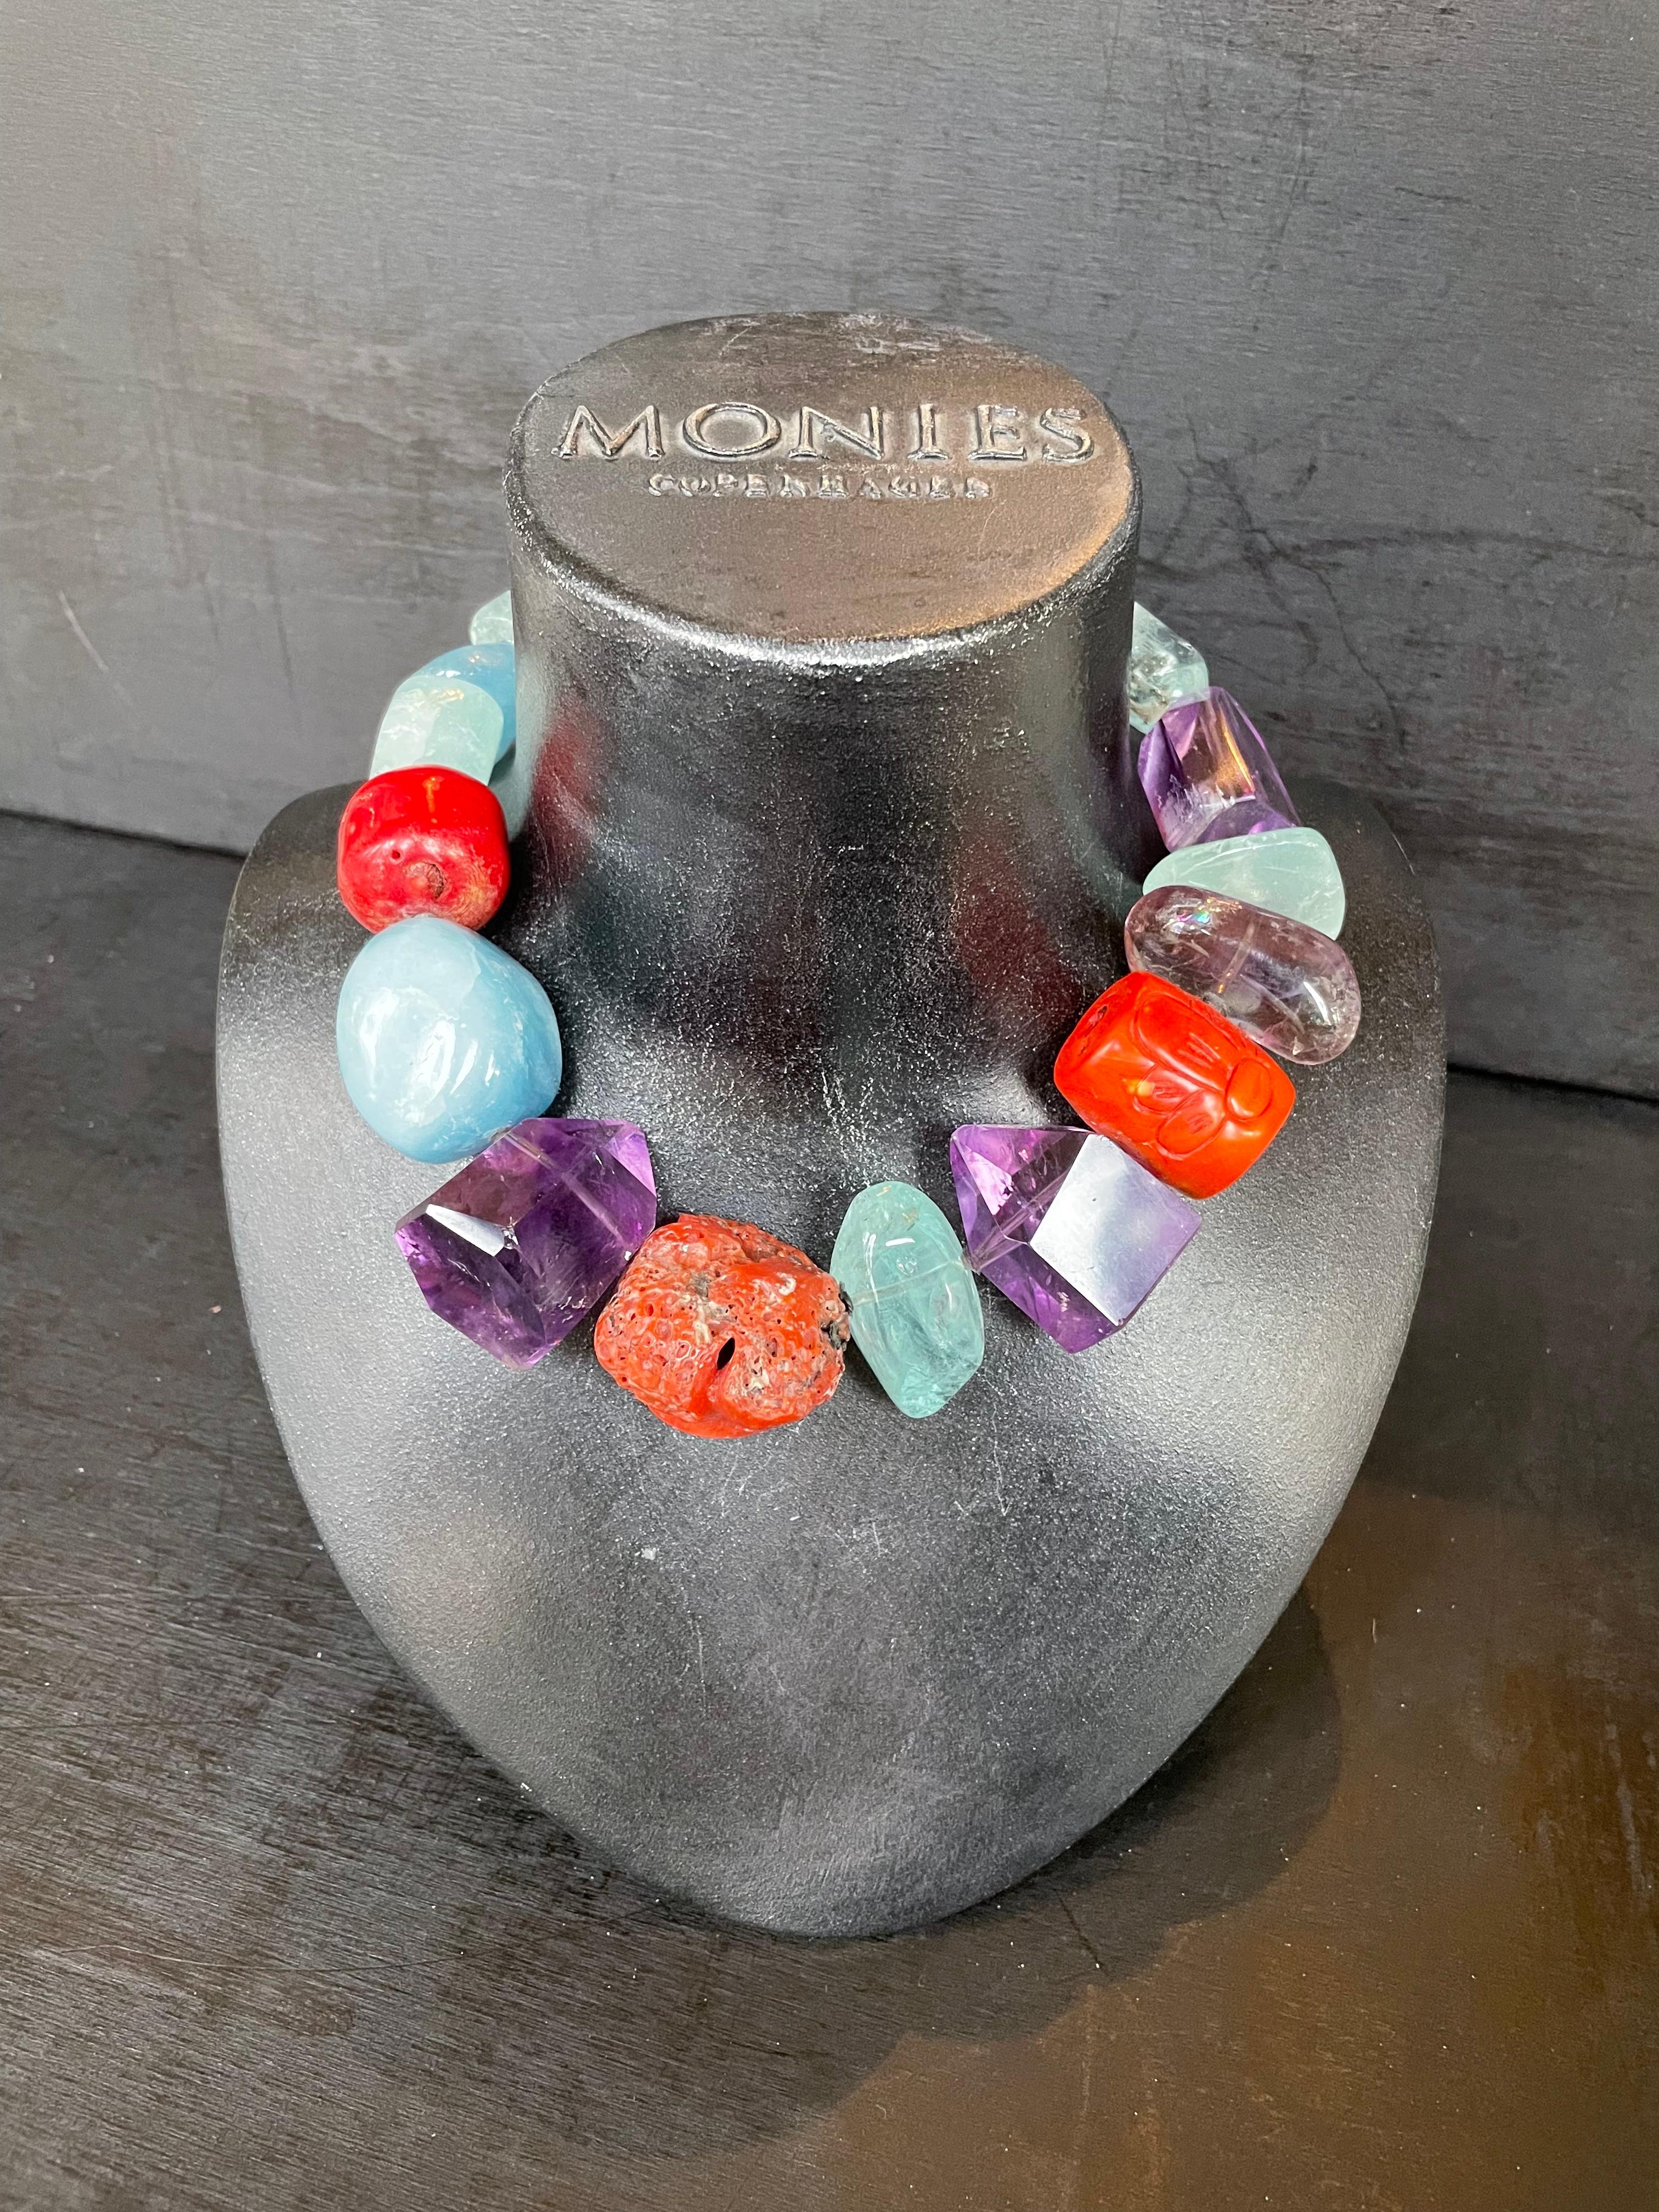 One-of-a-kind statement necklace from the Danish jewellery brand, Monies. 
Made in Aquamarine, Italian Coral, Amethyst and Chalcedony with a leather clasp. 

Handcrafted in the Monies Atelier in Copenhagen.